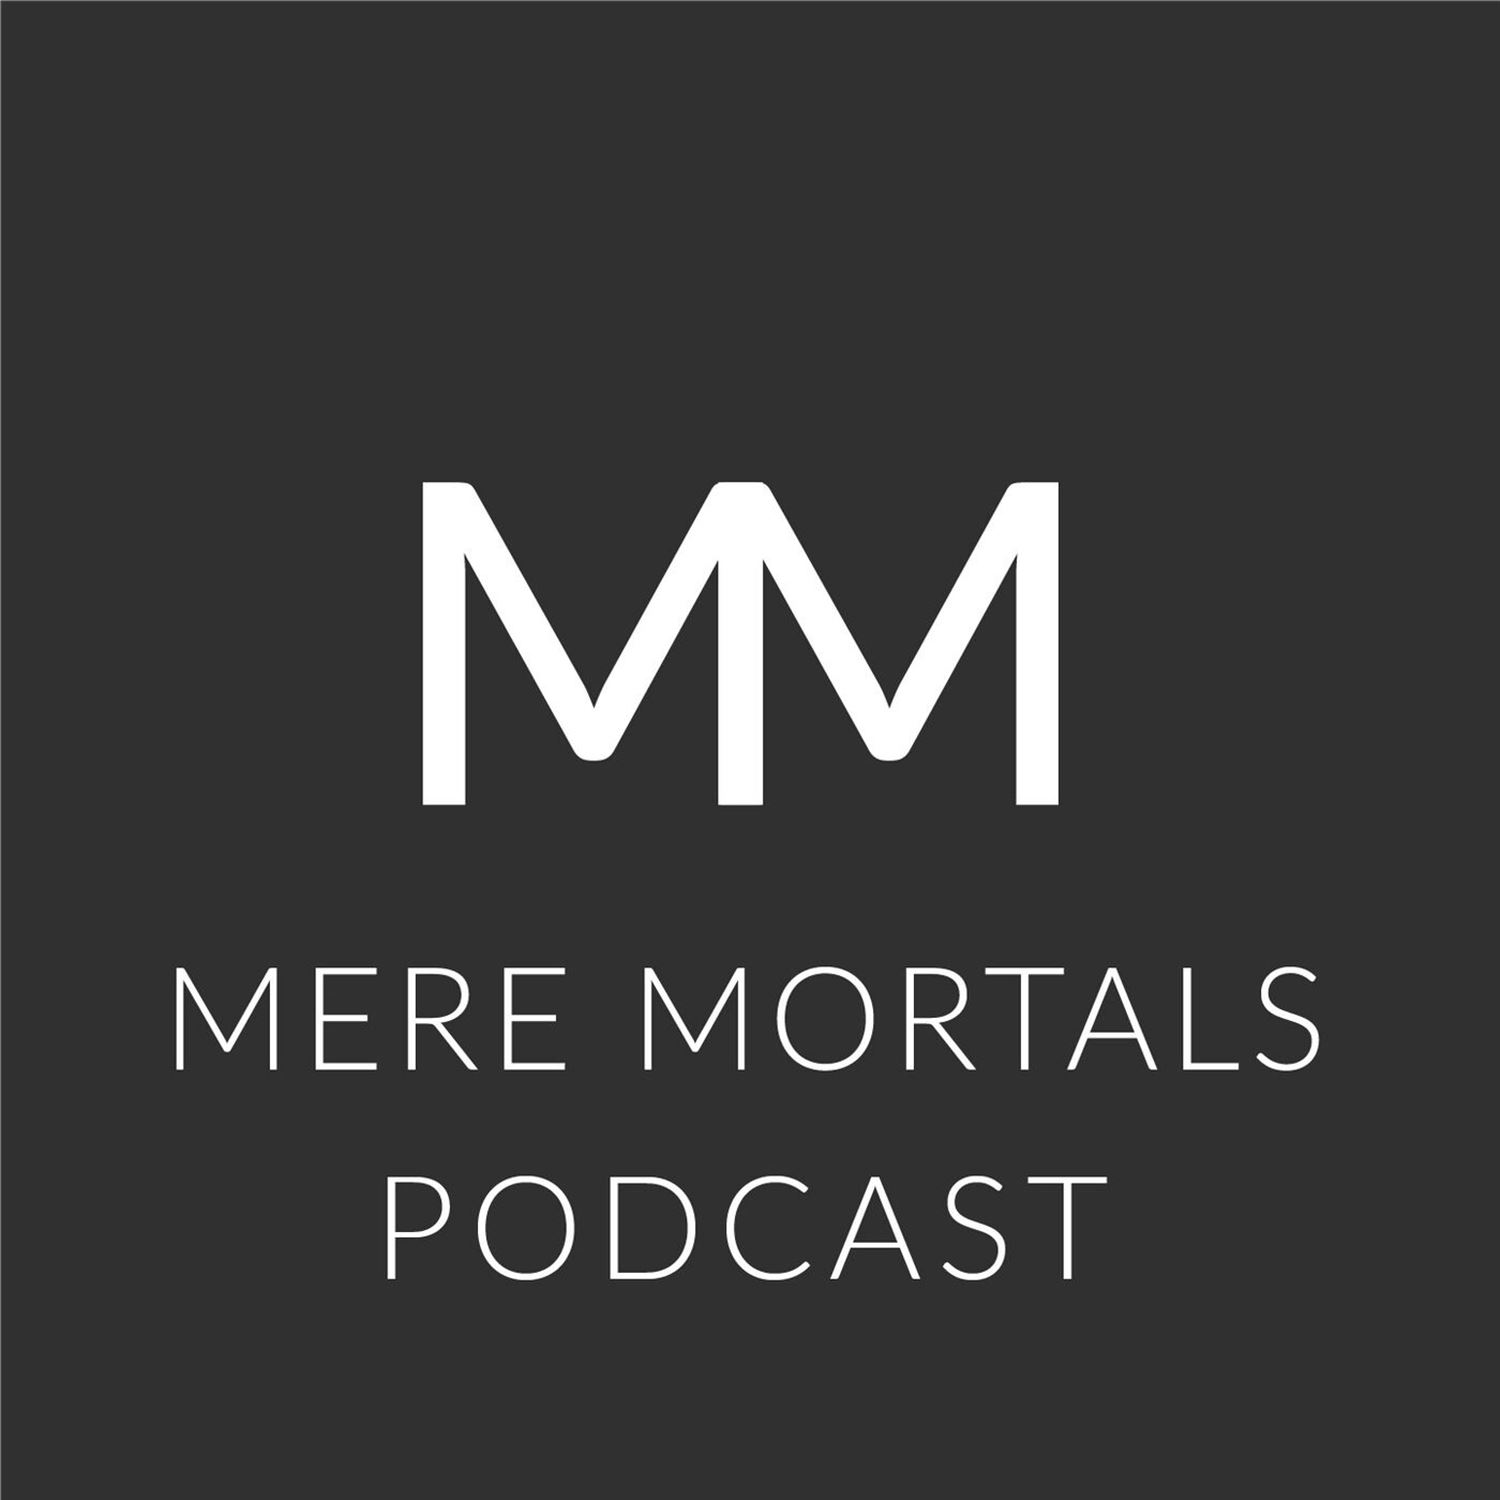 A Science, Pseudoscience Or Art? (Mere Mortals Episode #86 - Physiognomy)